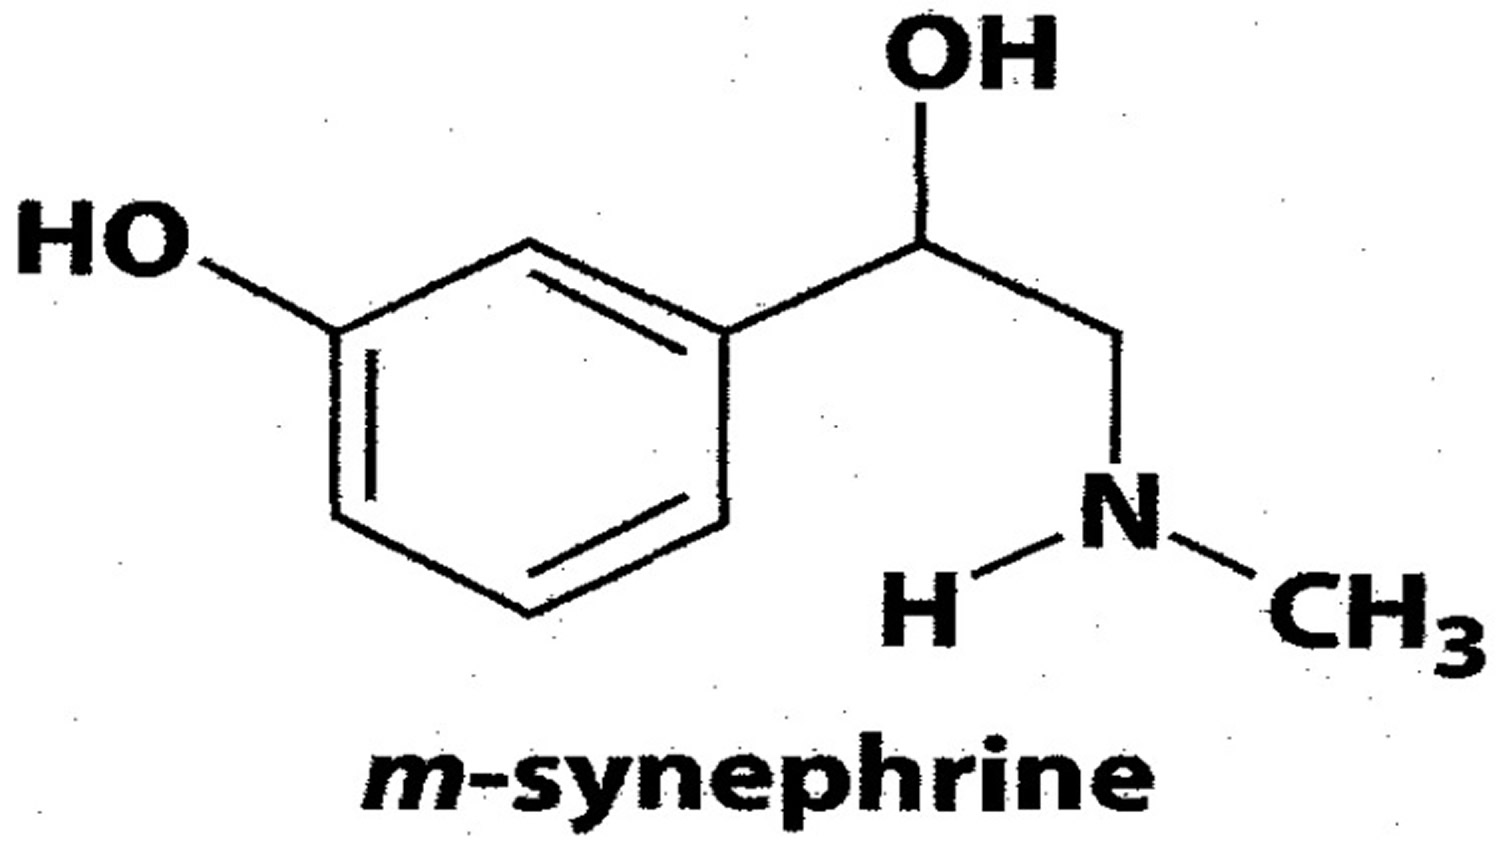 Chemical structure of m-Synephrine